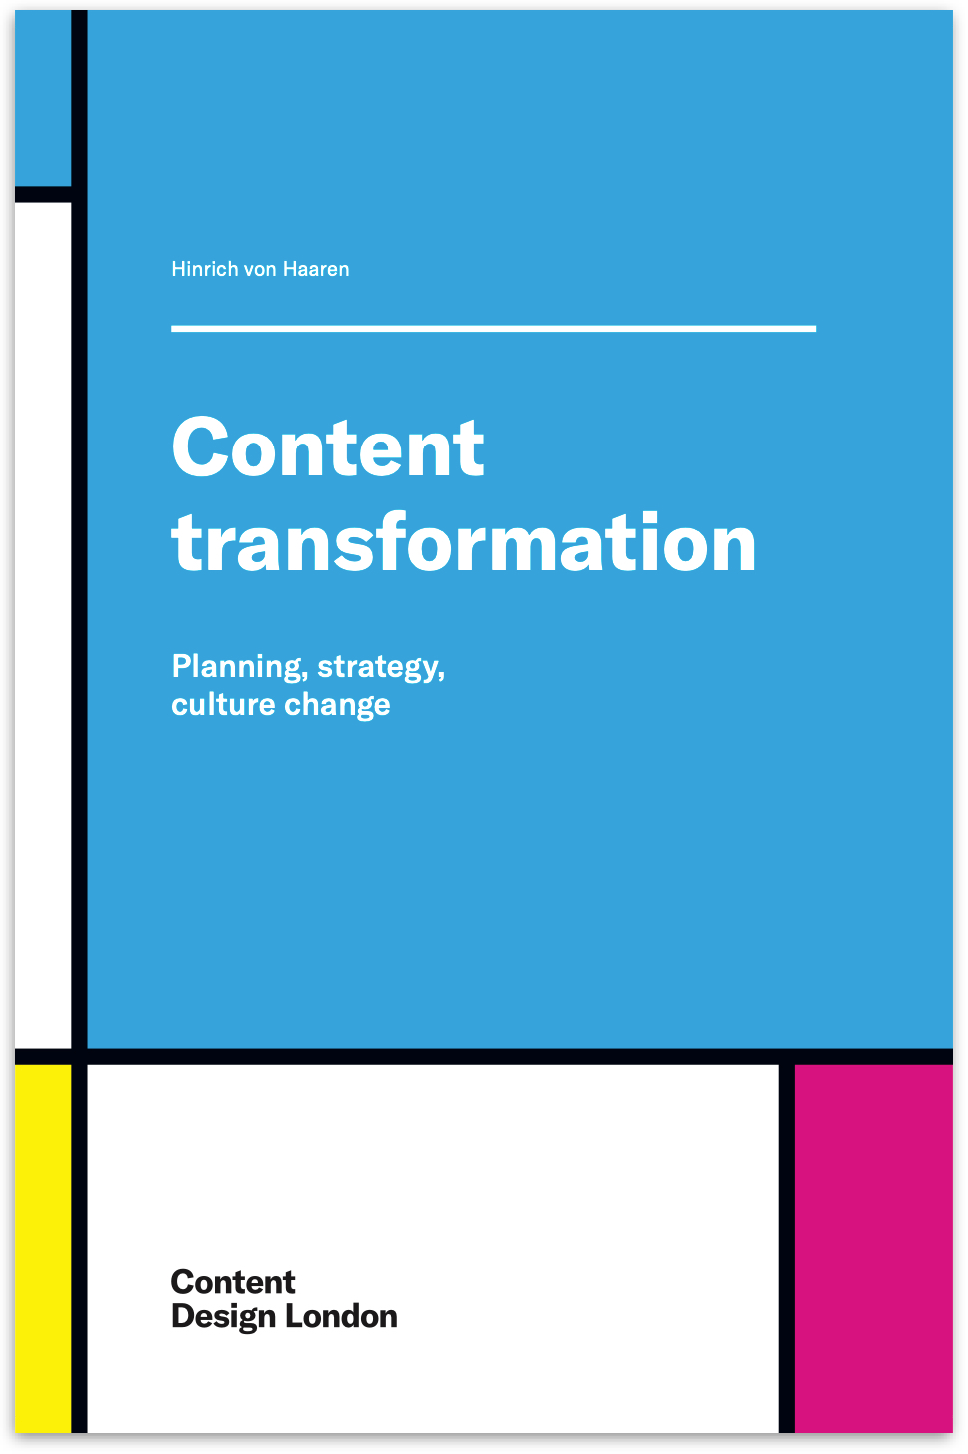 A photo of the front cover of Content transformation by Hinrich von Haaren